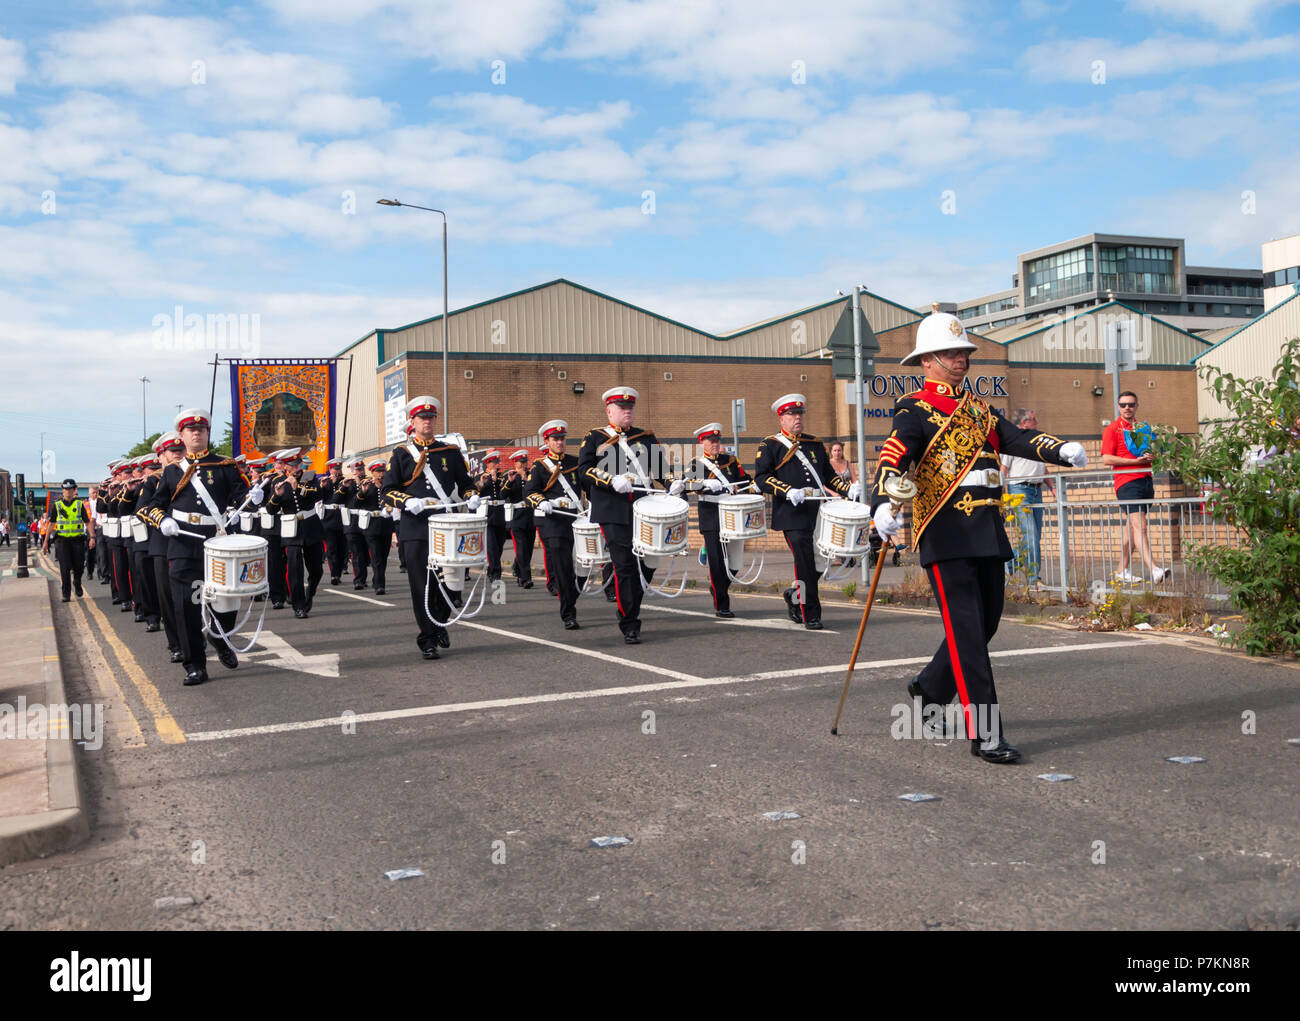 Glasgow, Scotland, UK. 7th July, 2018. Marching band members taking part in the annual Orange Walk through the streets of the city to mark the victory of Prince William of Orange over King James II at the Battle of the Boyne in 1690. Credit: Skully/Alamy Live News Stock Photo